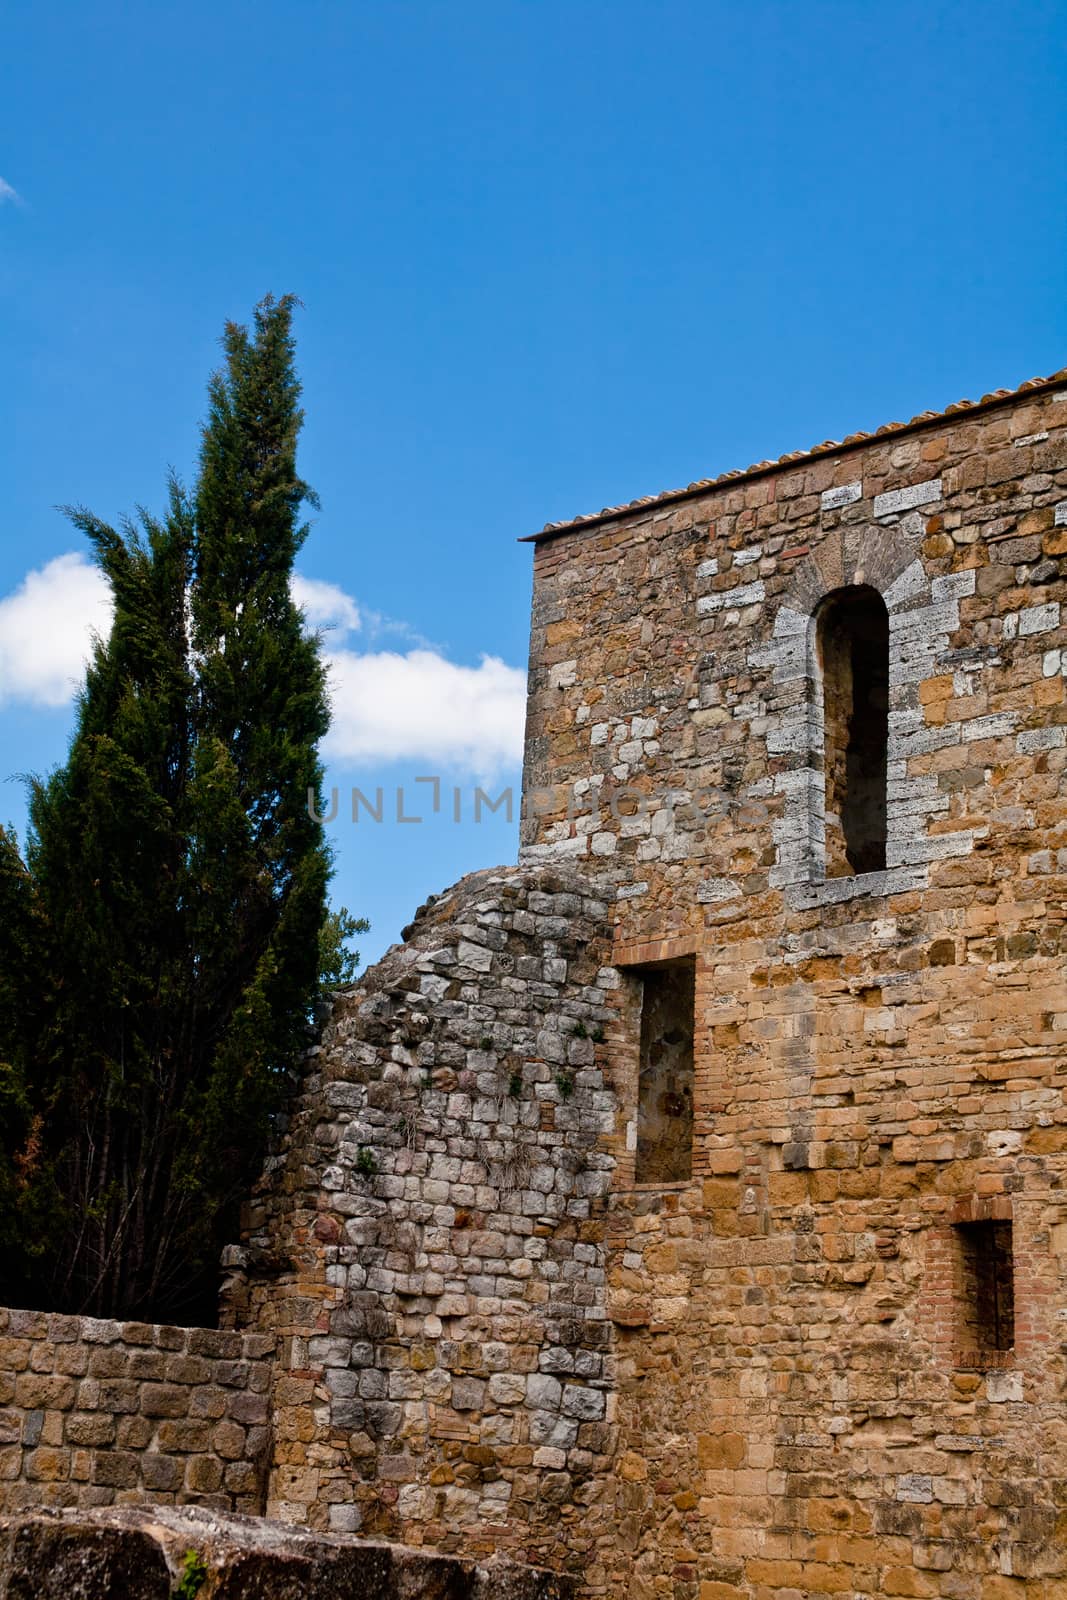 An old medieval building and ruins in San Quirico d'Orcia